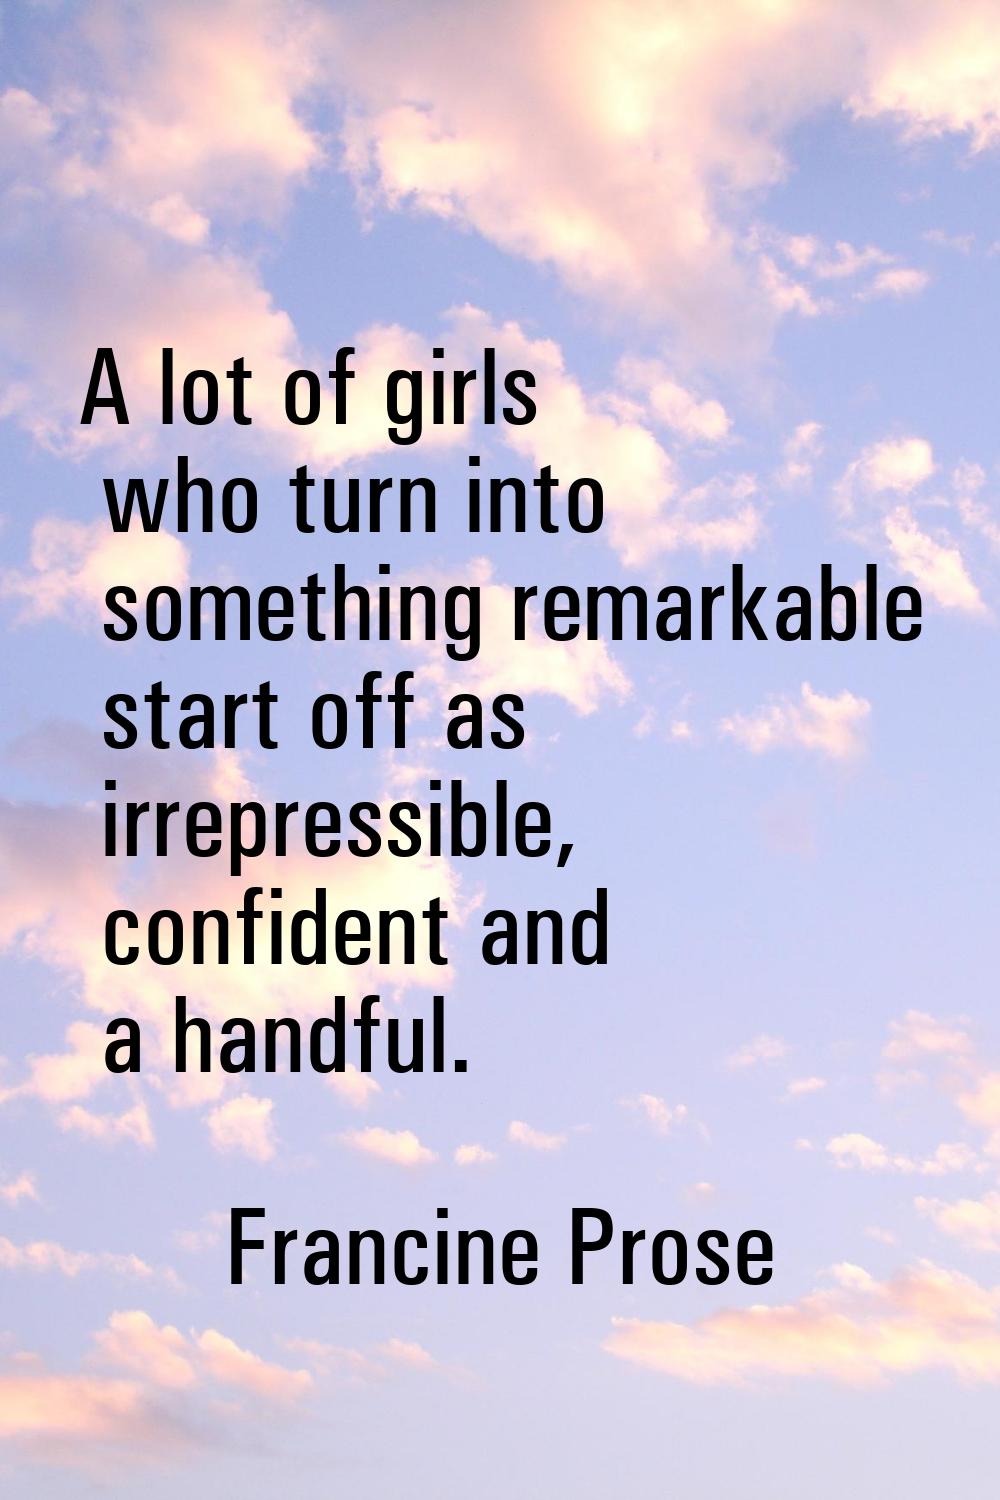 A lot of girls who turn into something remarkable start off as irrepressible, confident and a handf